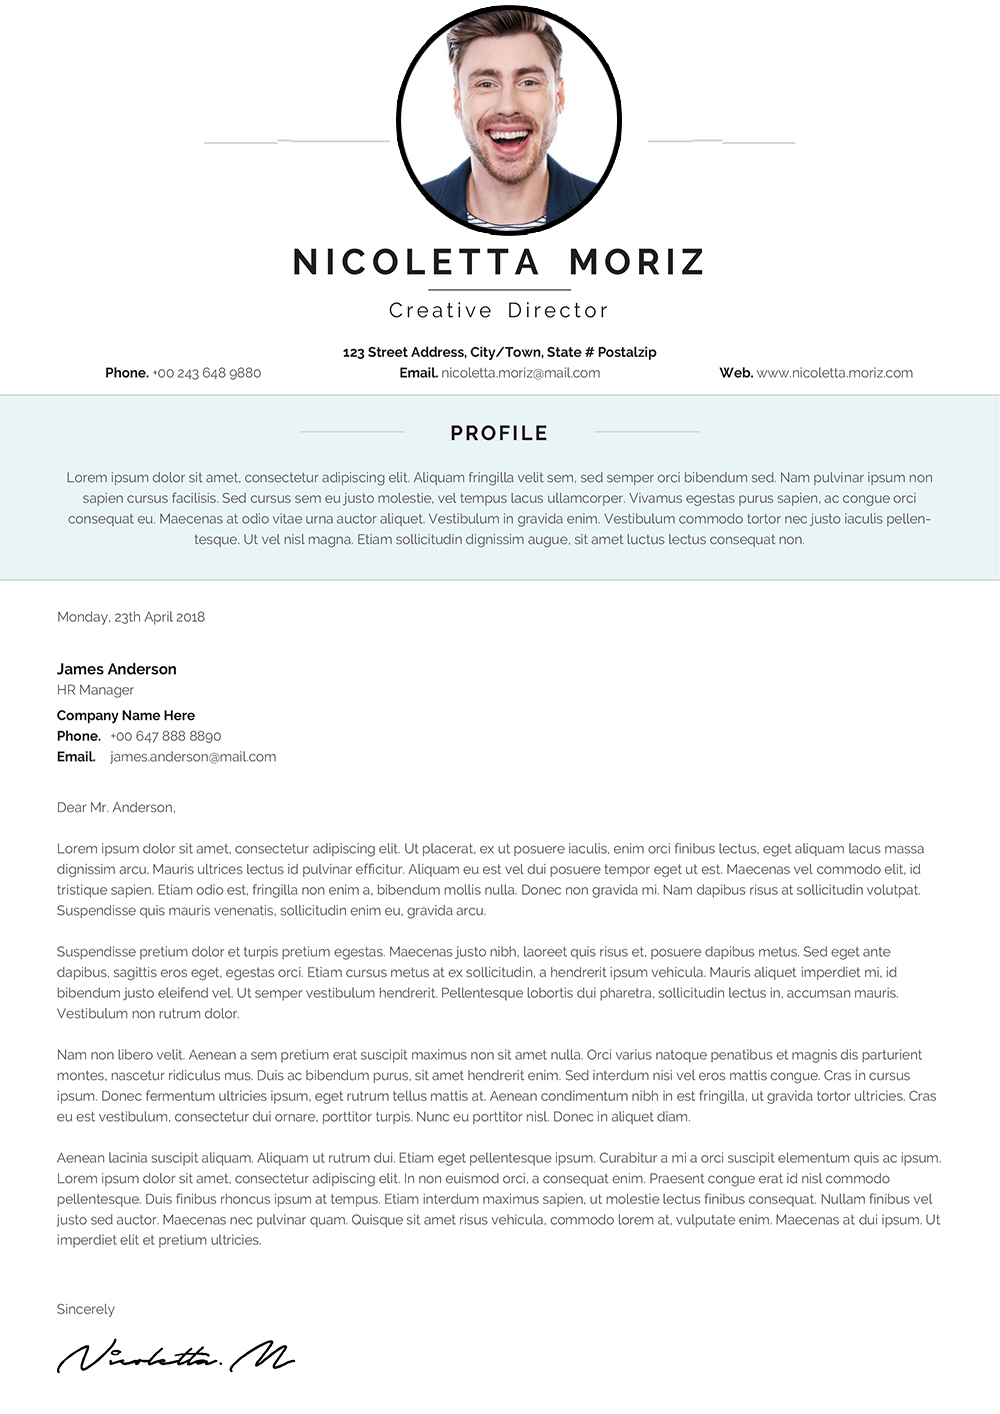 Get Resume Cover Letter Examples 2021 PNG Gover